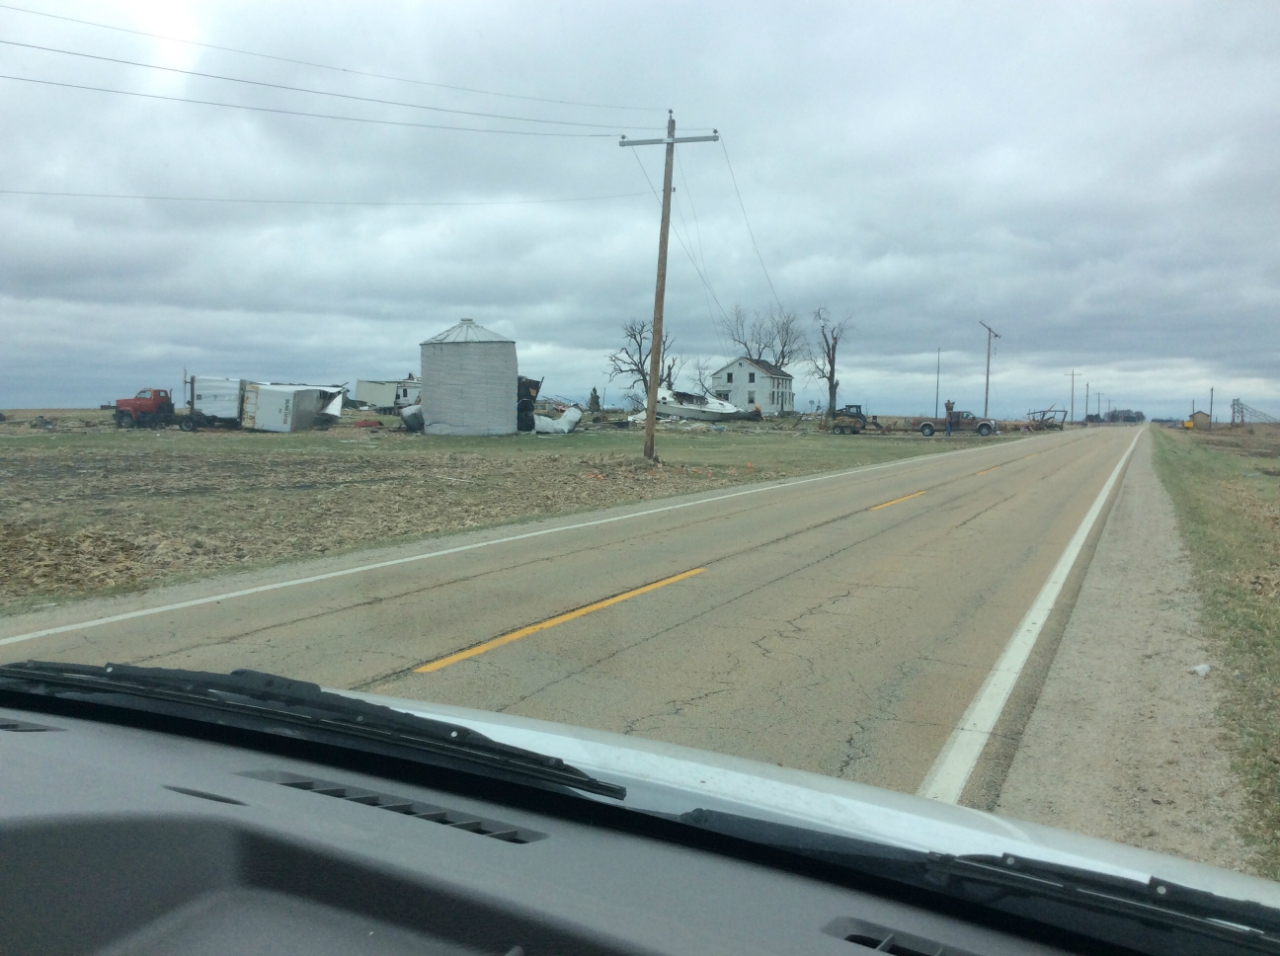 Photo showing damage from Marseilles tornado